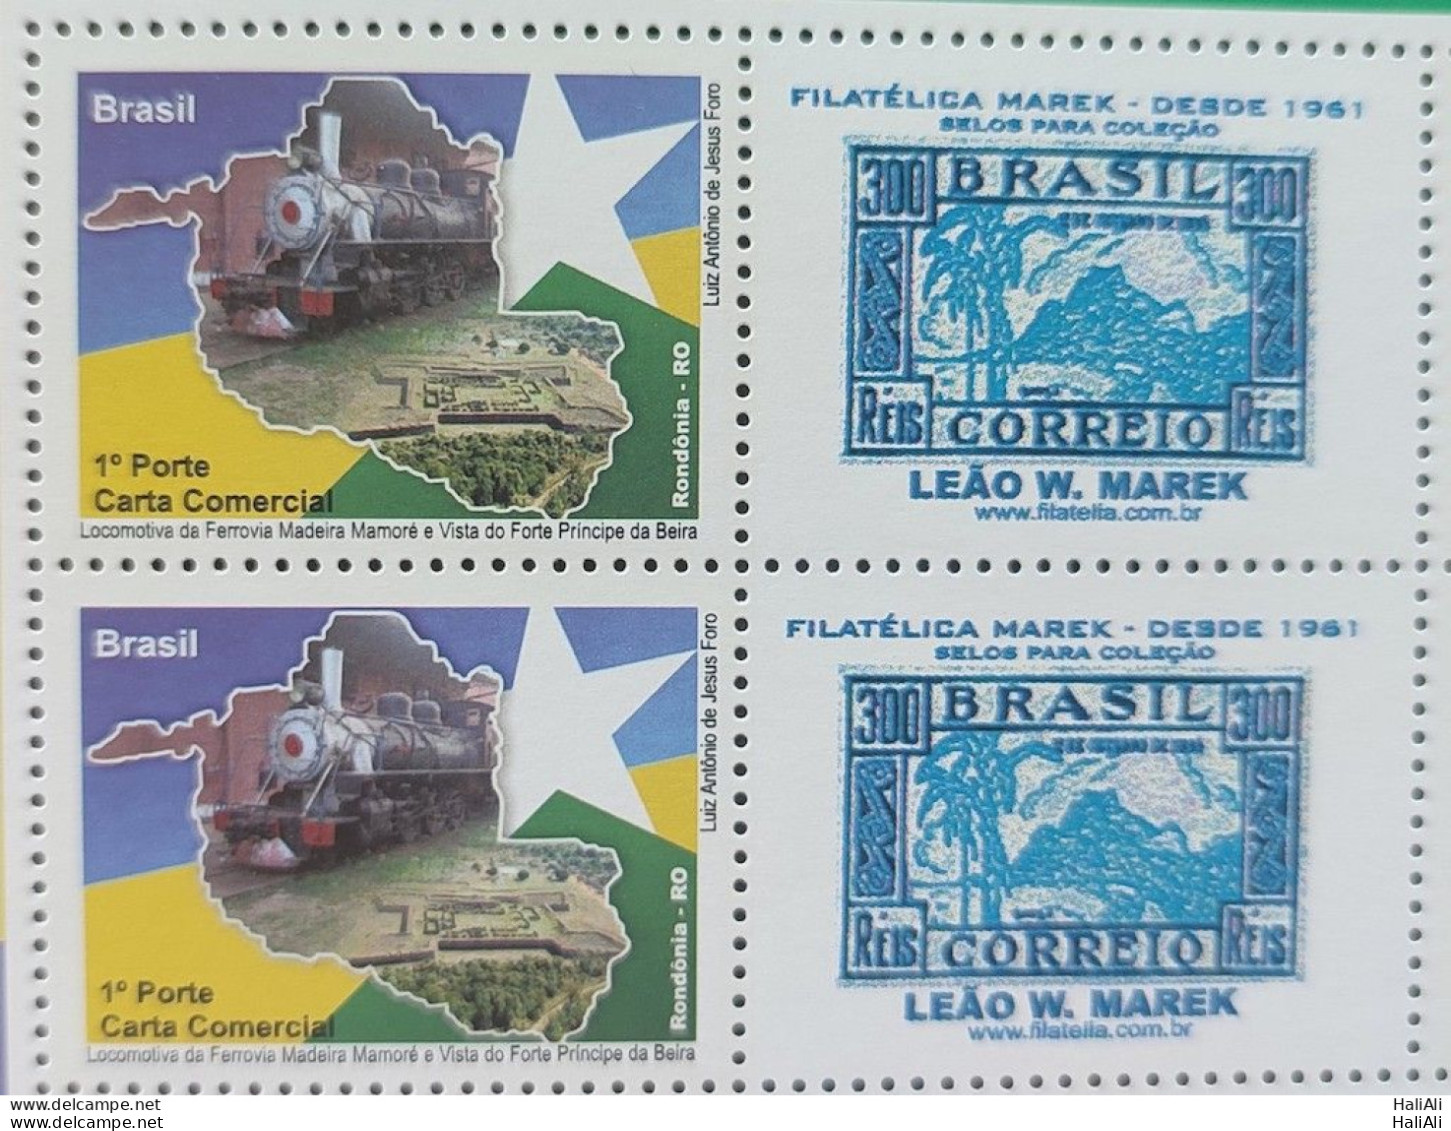 C 2926 Brazil Personalized Stamp Rondonia Train Map Star 2009 Block Of 4 - Personalized Stamps